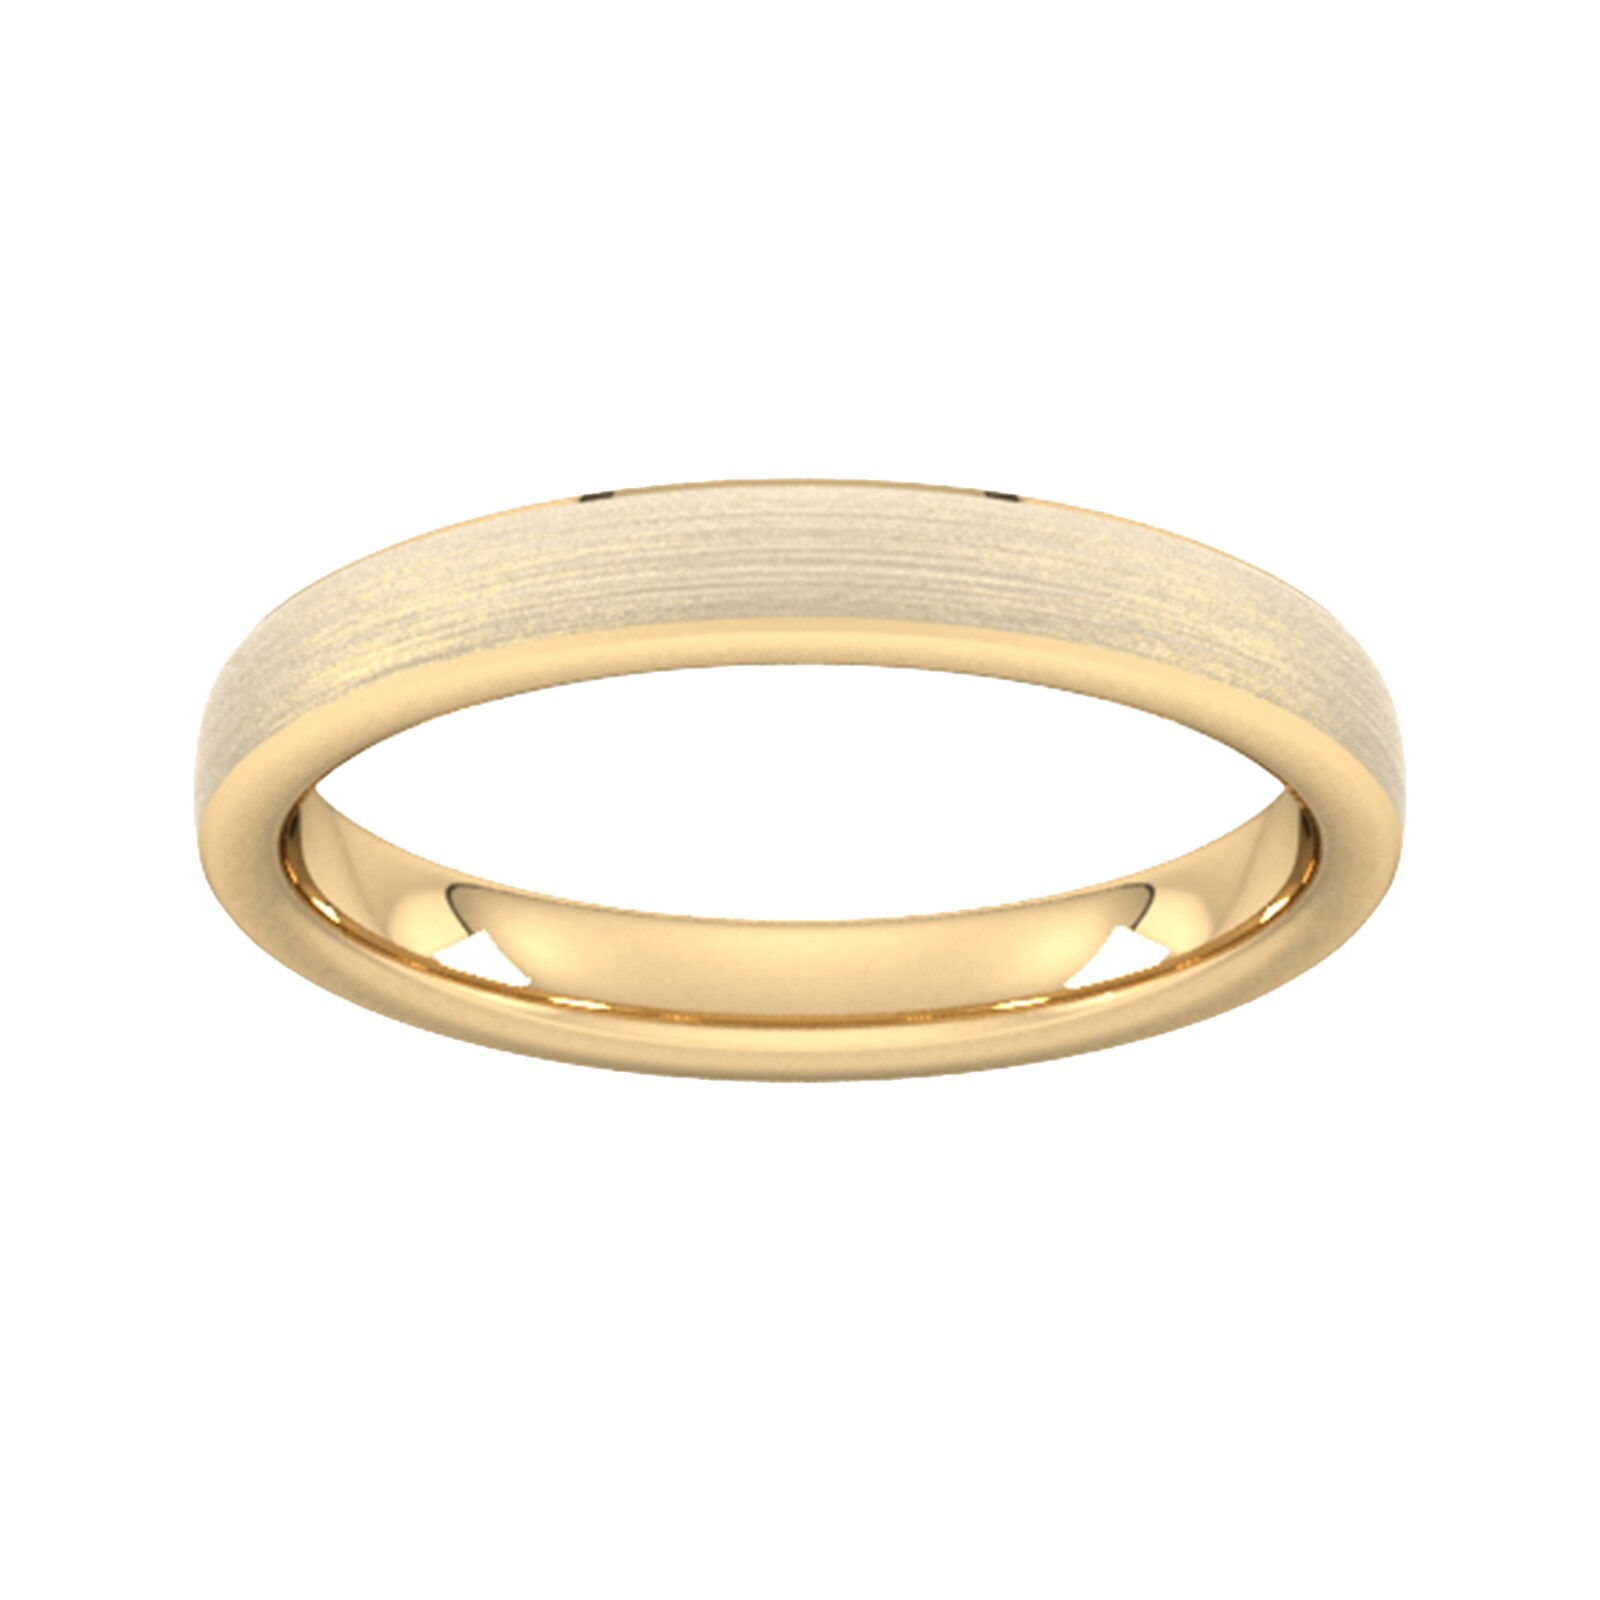 3mm Traditional Court Heavy Polished Chamfered Edges With Matt Centre Wedding Ring In 9 Carat Yellow Gold - Ring Size K